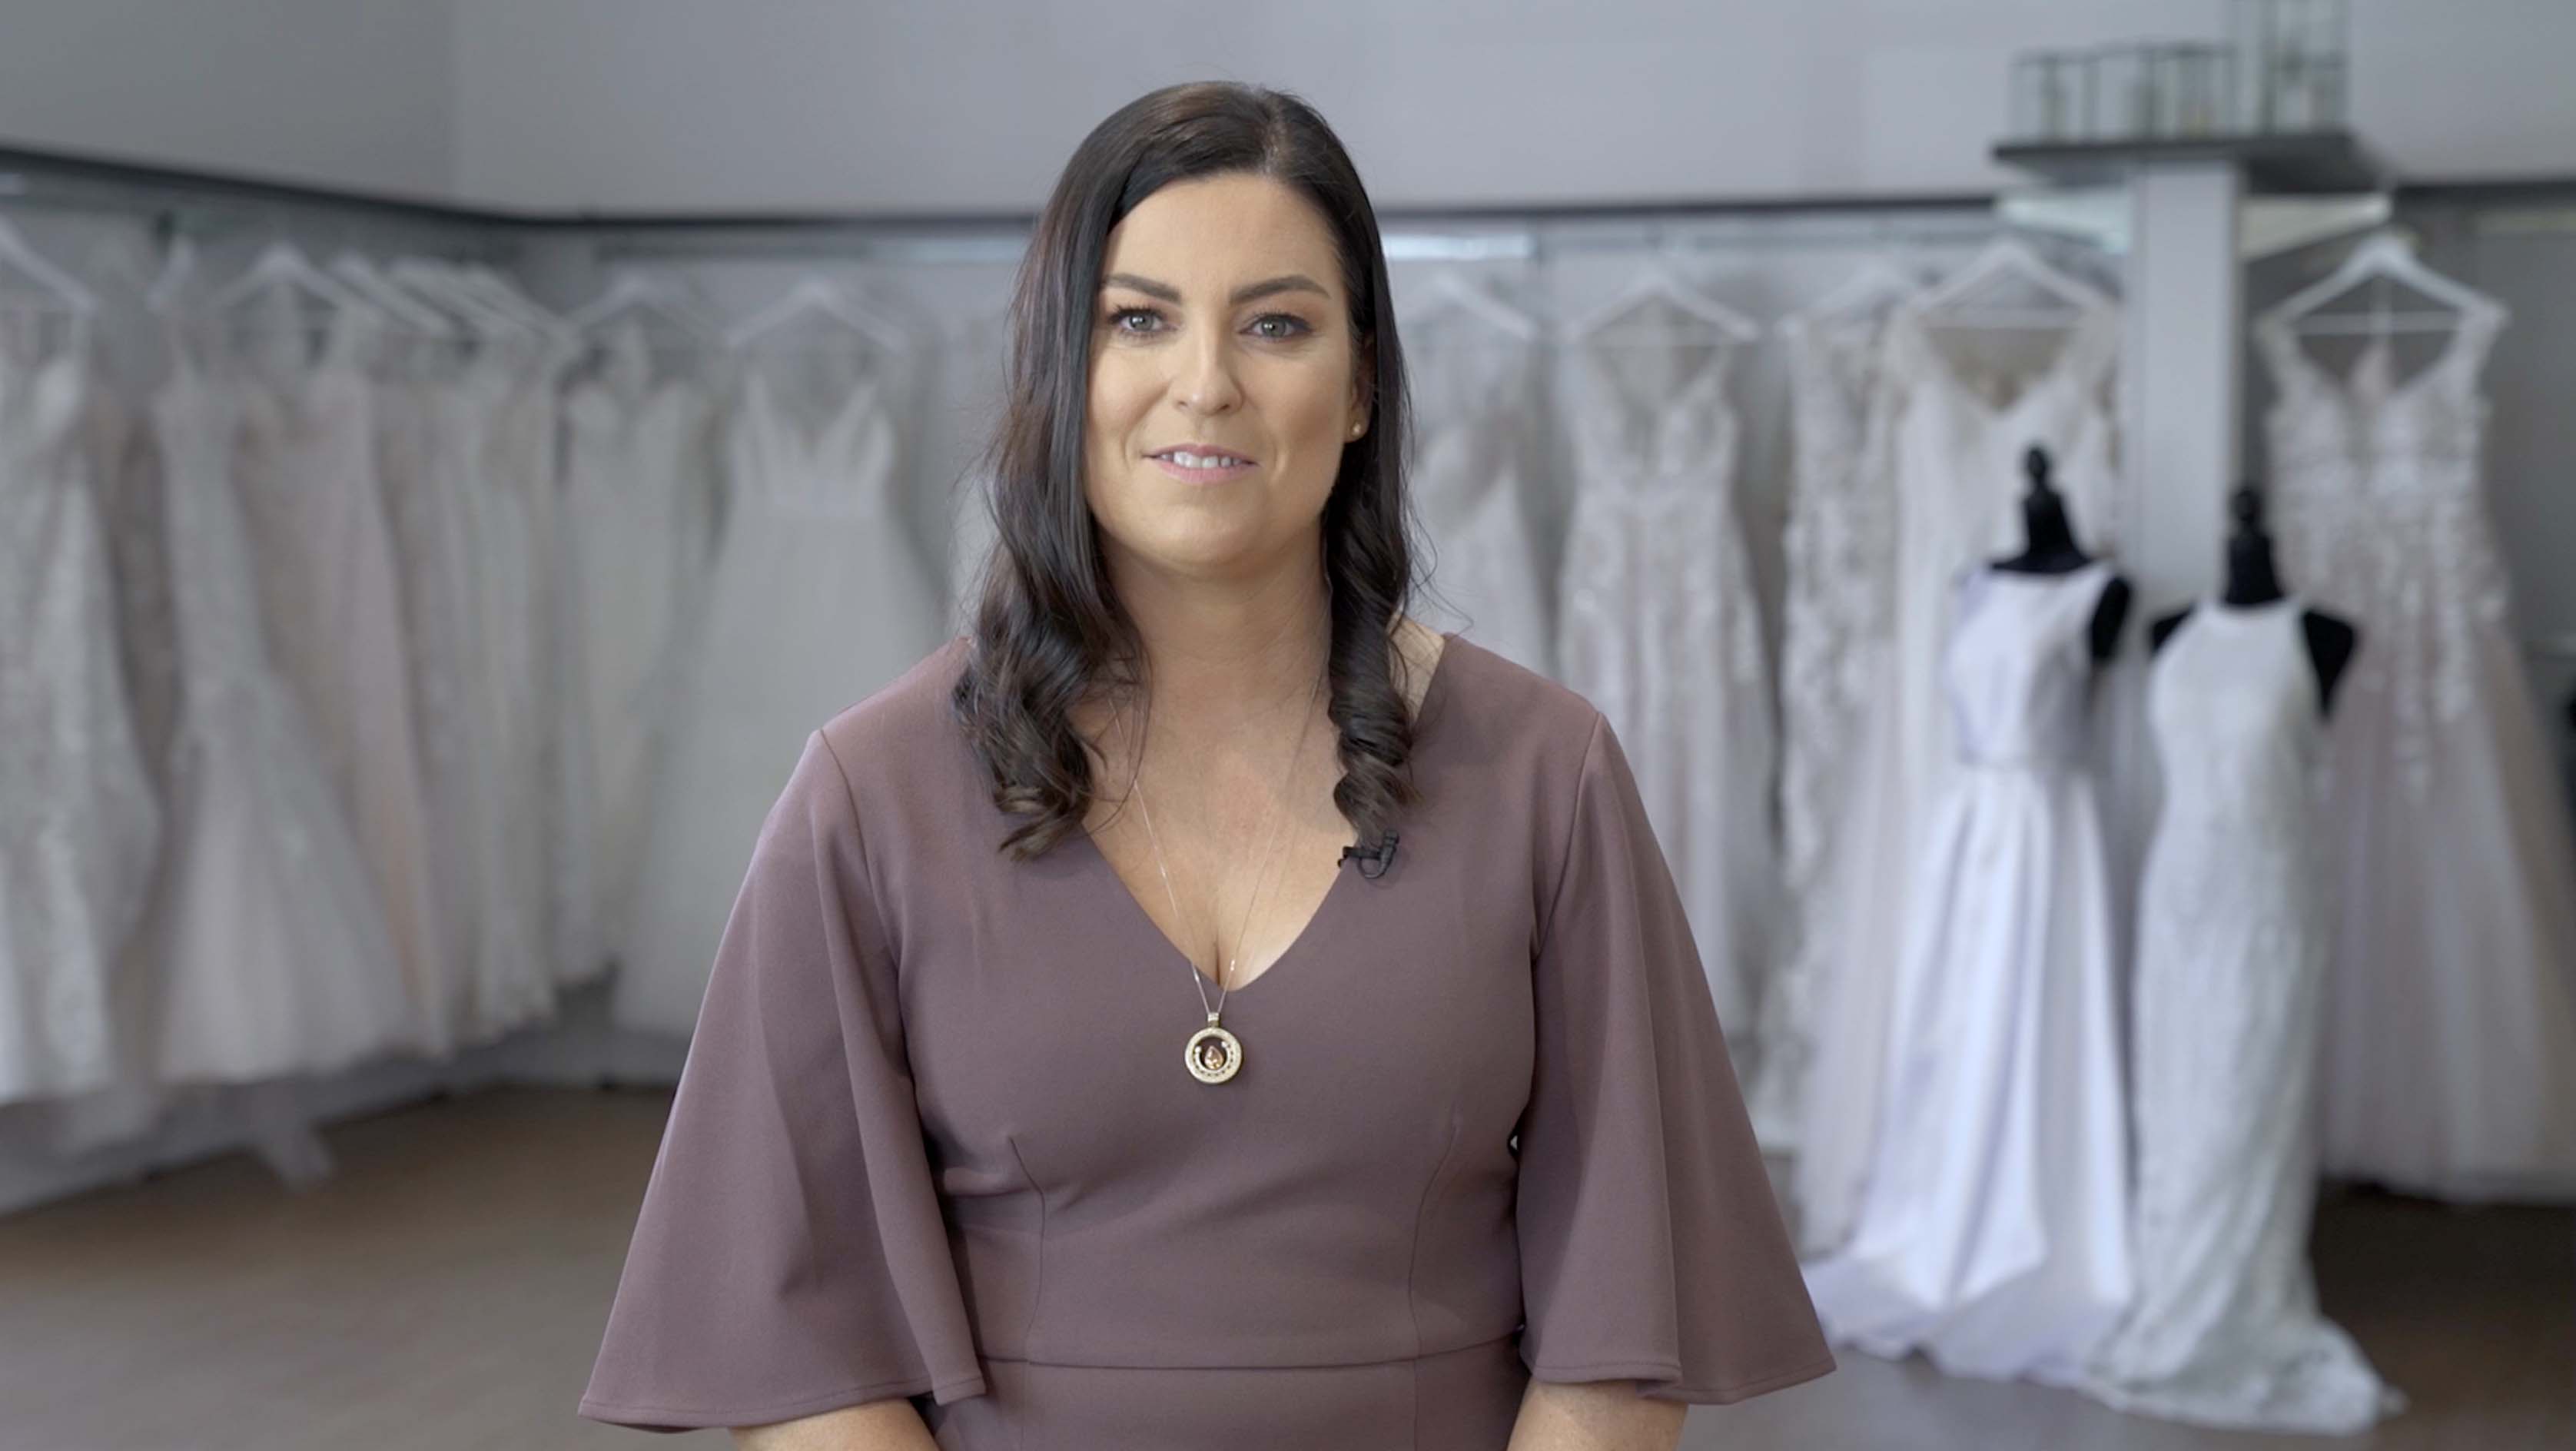 Load video: What to expect on your bridal fitting